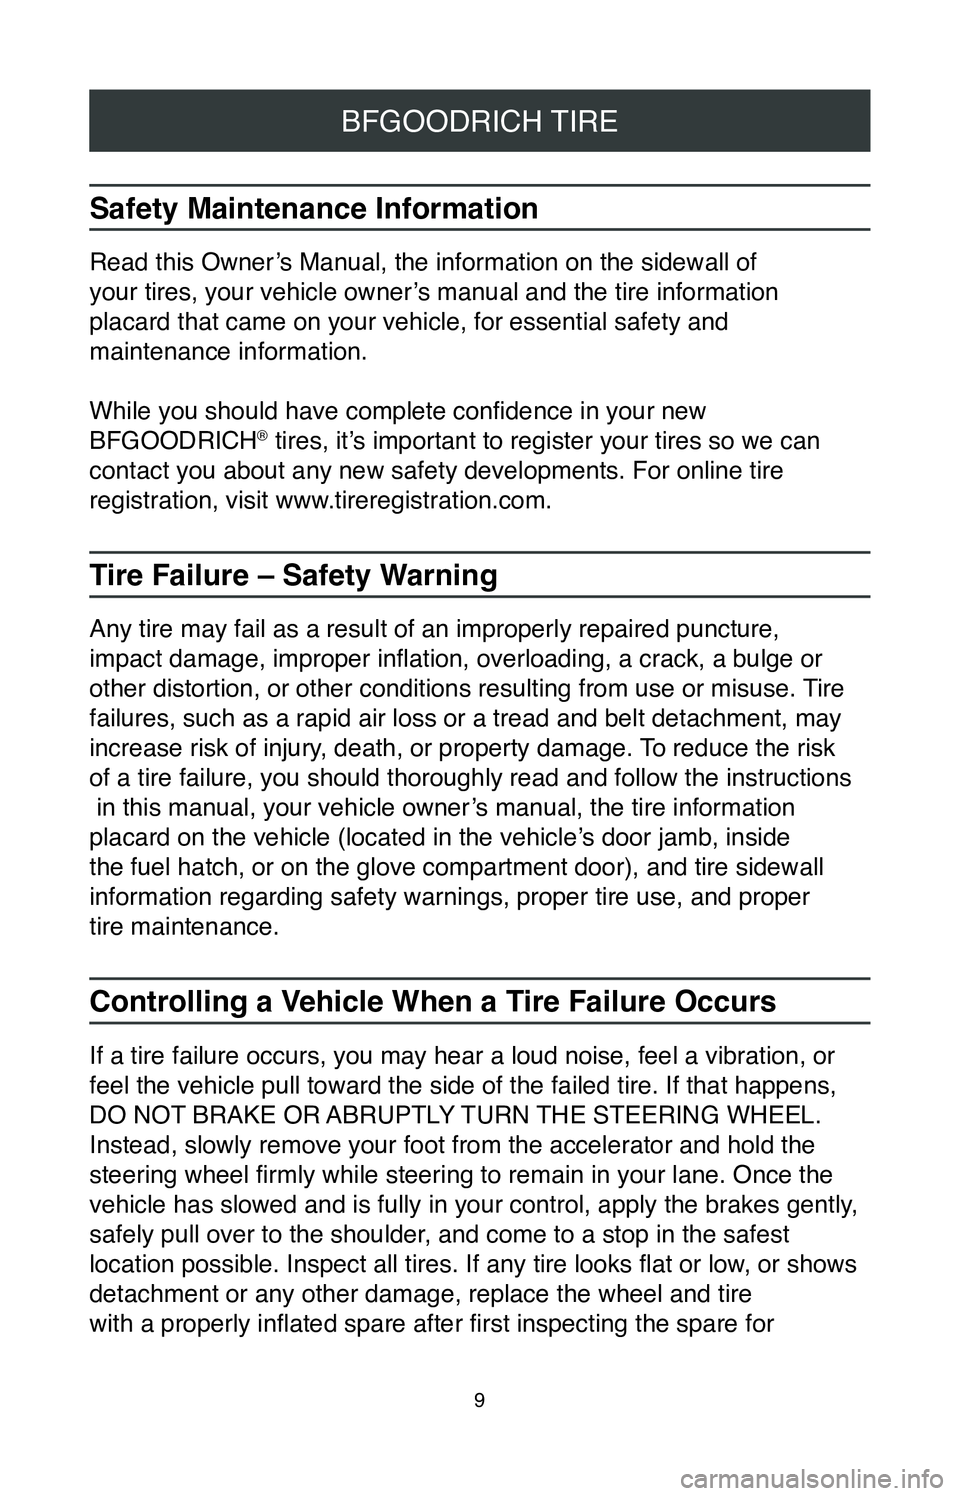 TOYOTA COROLLA HYBRID 2020  Warranties & Maintenance Guides (in English) 9
BFGOODRICH TIRE
Safety Maintenance Information
Read this Owner’s Manual, the information on the sidewall of  
your tires, your vehicle owner’s manual and the tire information   
placard that cam